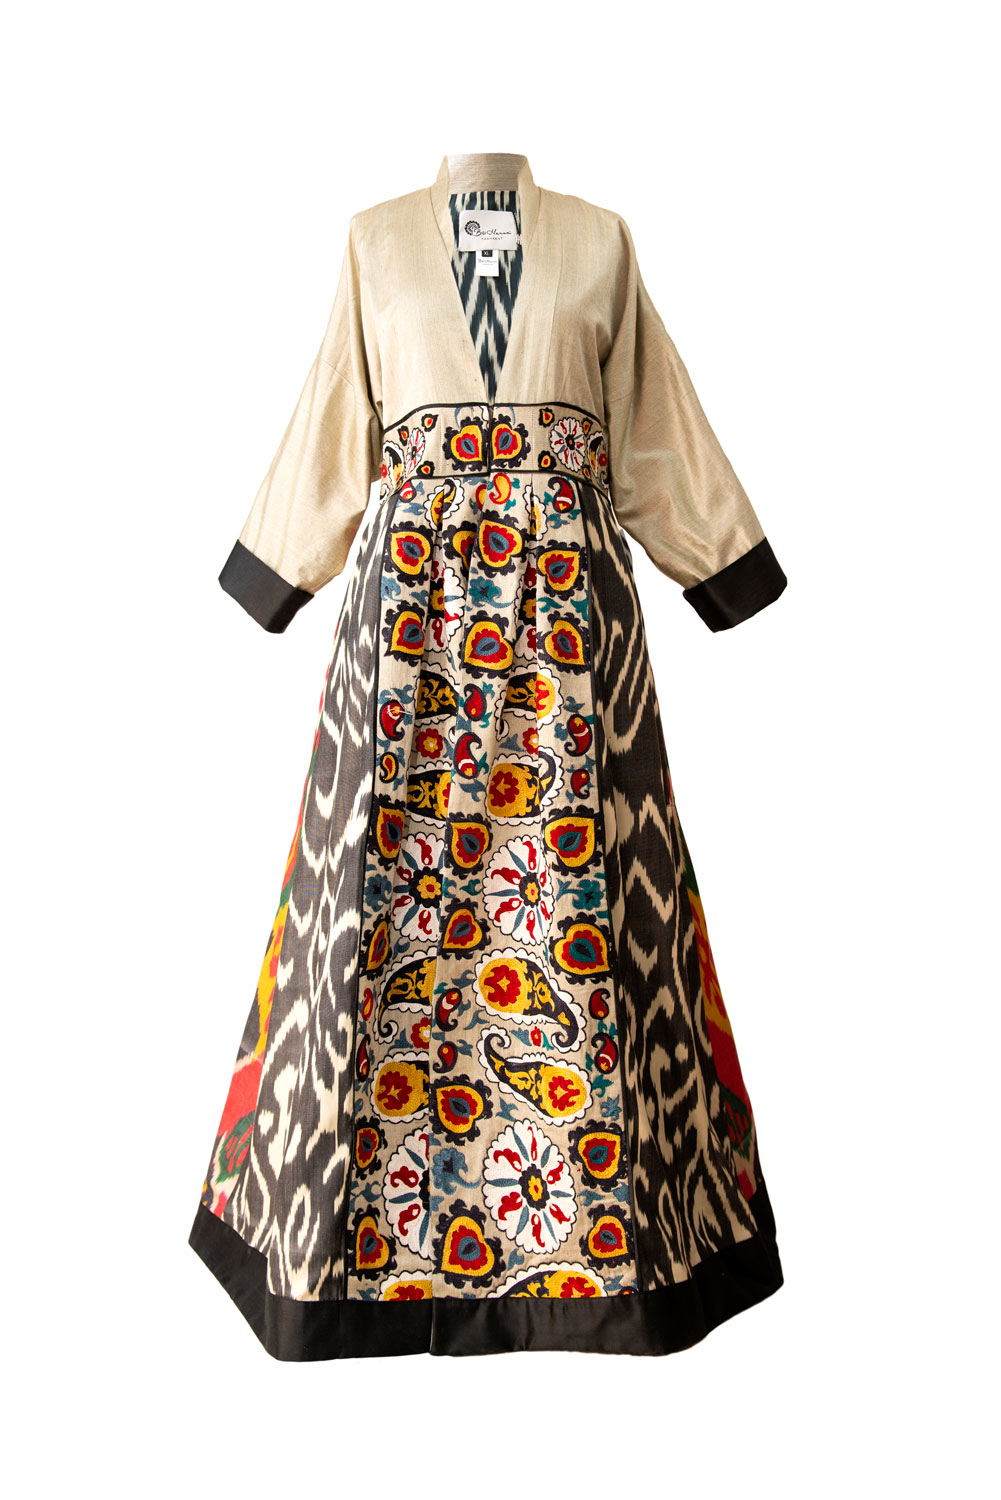 Jane Austen Goodwill wij One-of-a-Kind Luxury Silk Ikat Kaftan with Suzani Embroidery IK583 / IK645  – Welcome – Bibi Hanum – Online shopping for luxury ikat kaftans,  contemporary designer clothes, handicrafts and souvenirs from Uzbekistan